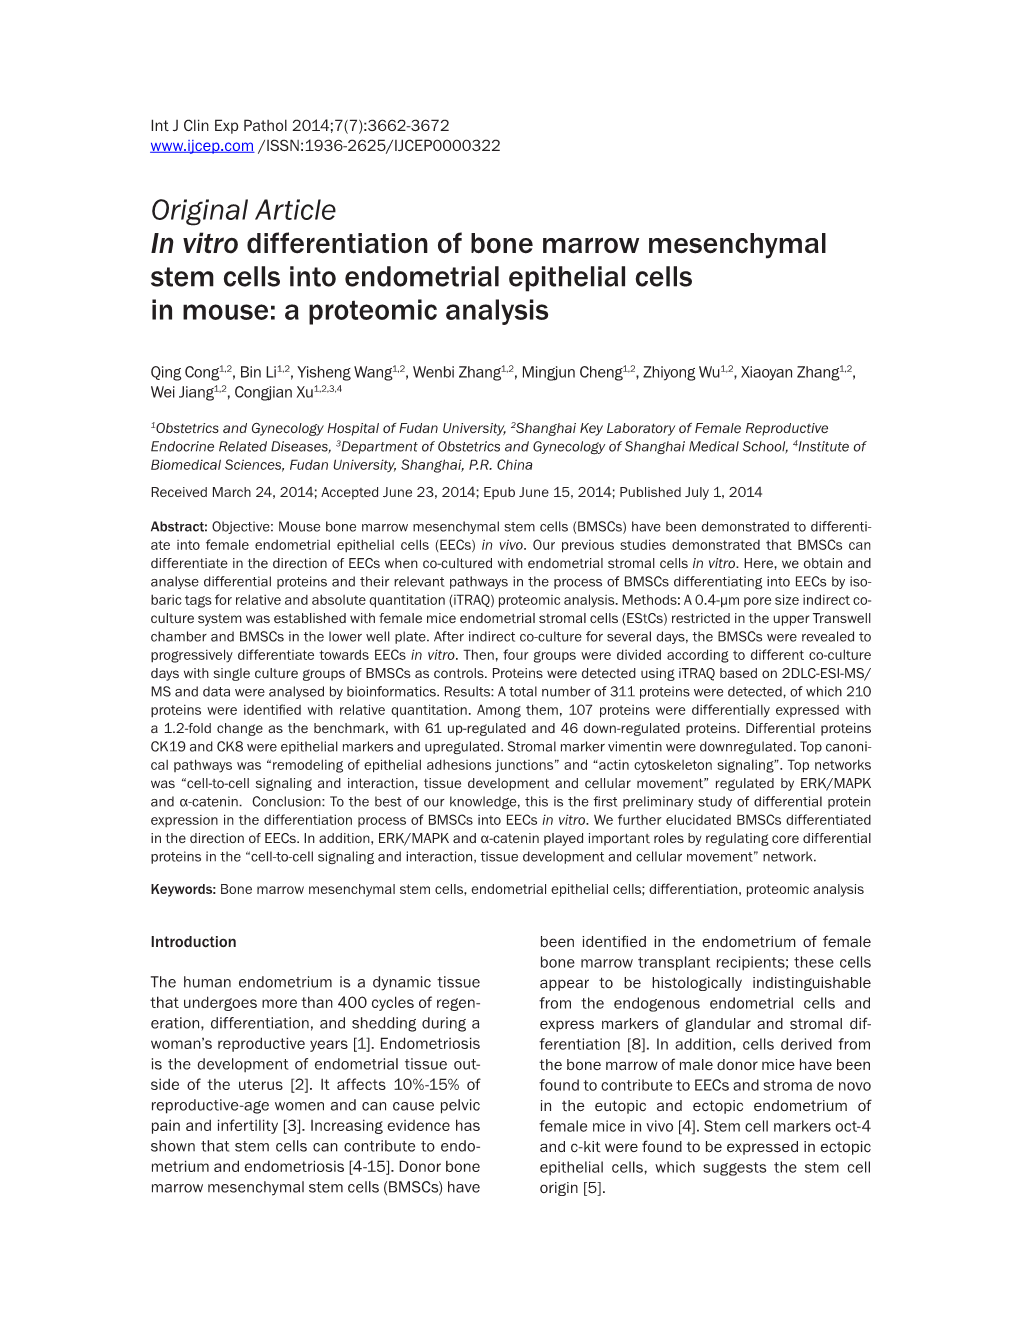 In Vitro Differentiation of Bone Marrow Mesenchymal Stem Cells Into Endometrial Epithelial Cells in Mouse: a Proteomic Analysis